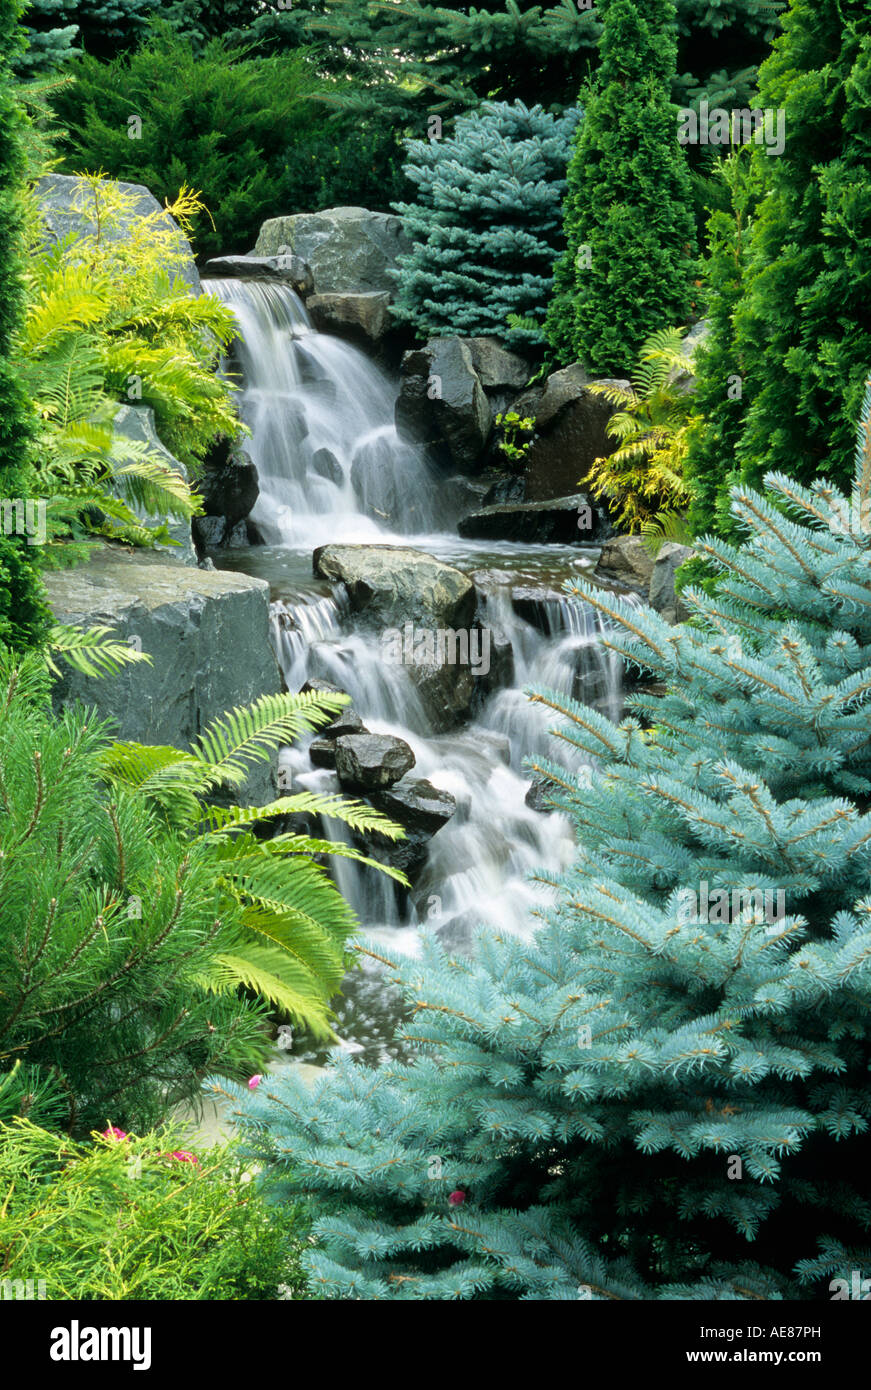 WATERFALL IN MINNESOTA GARDEN IN AUGUST SURROUNDED BY FERNS AND TREES. Stock Photo